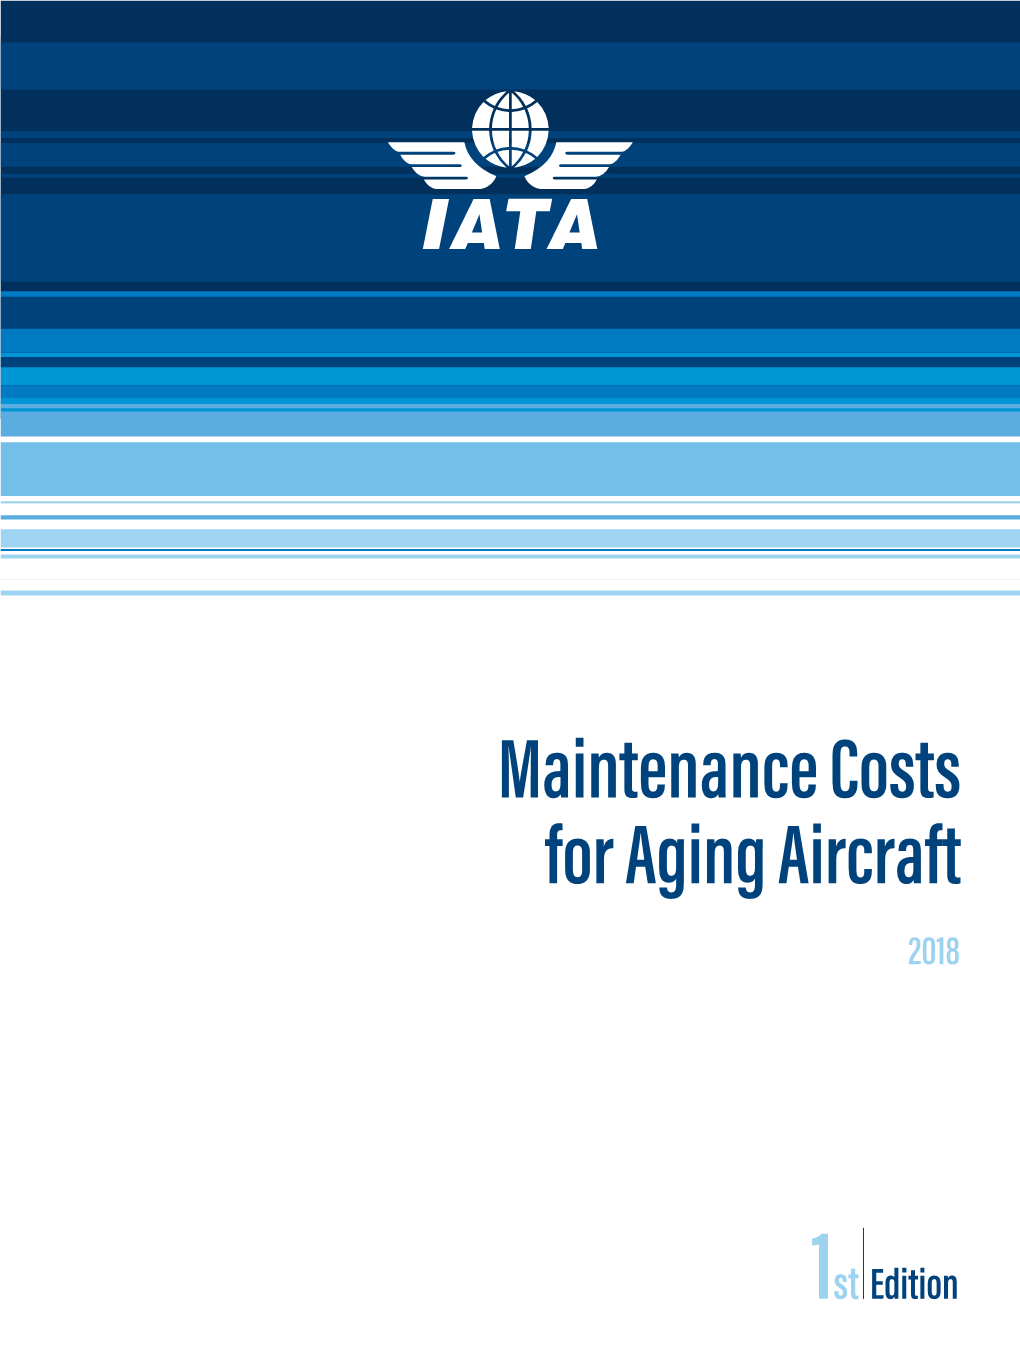 Maintenance Cost for Aging Aircraft, 1St Edition